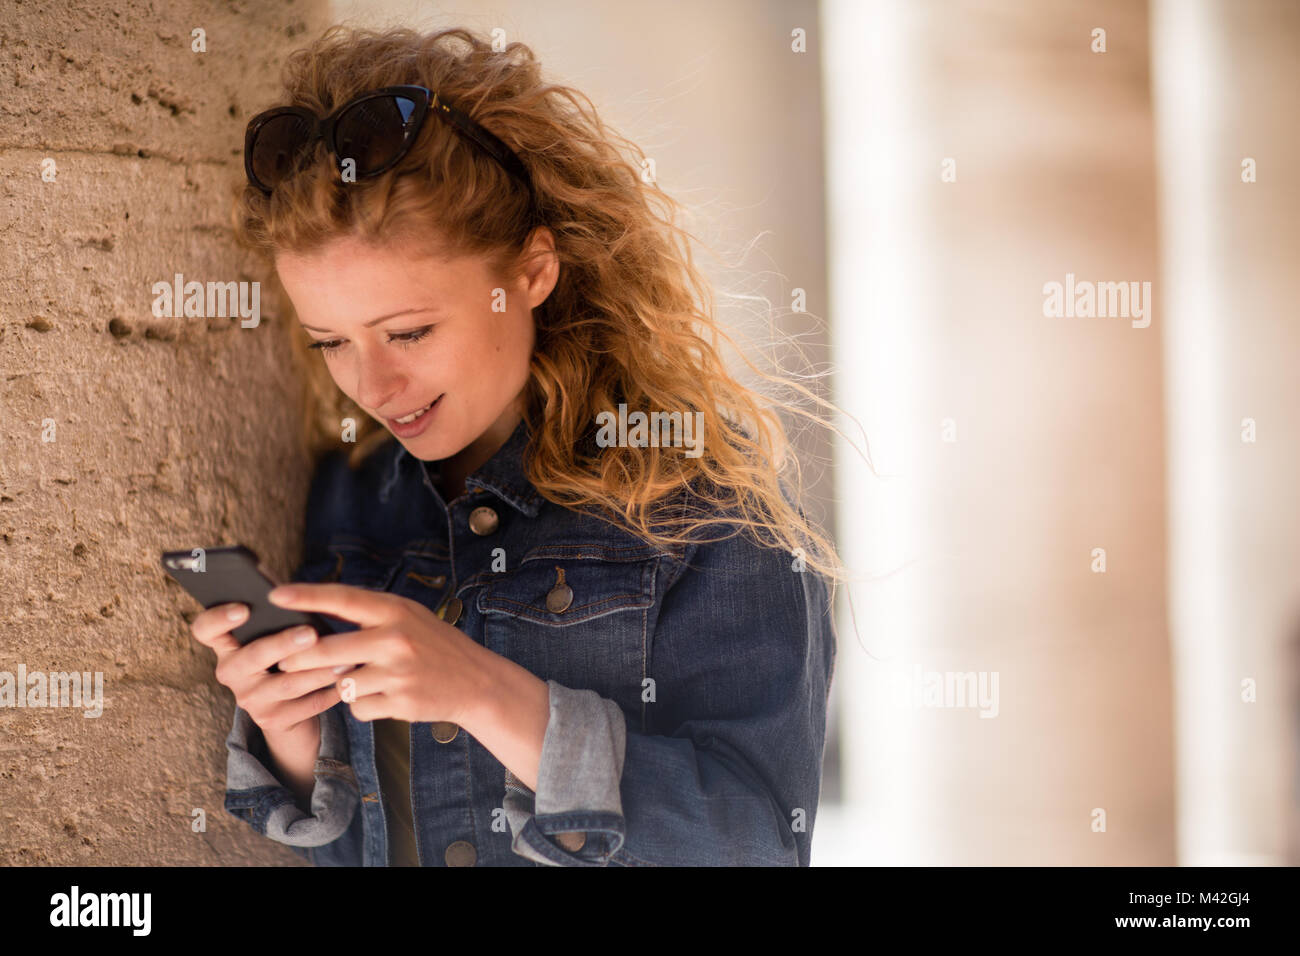 Tourist looking at smartphone Stock Photo